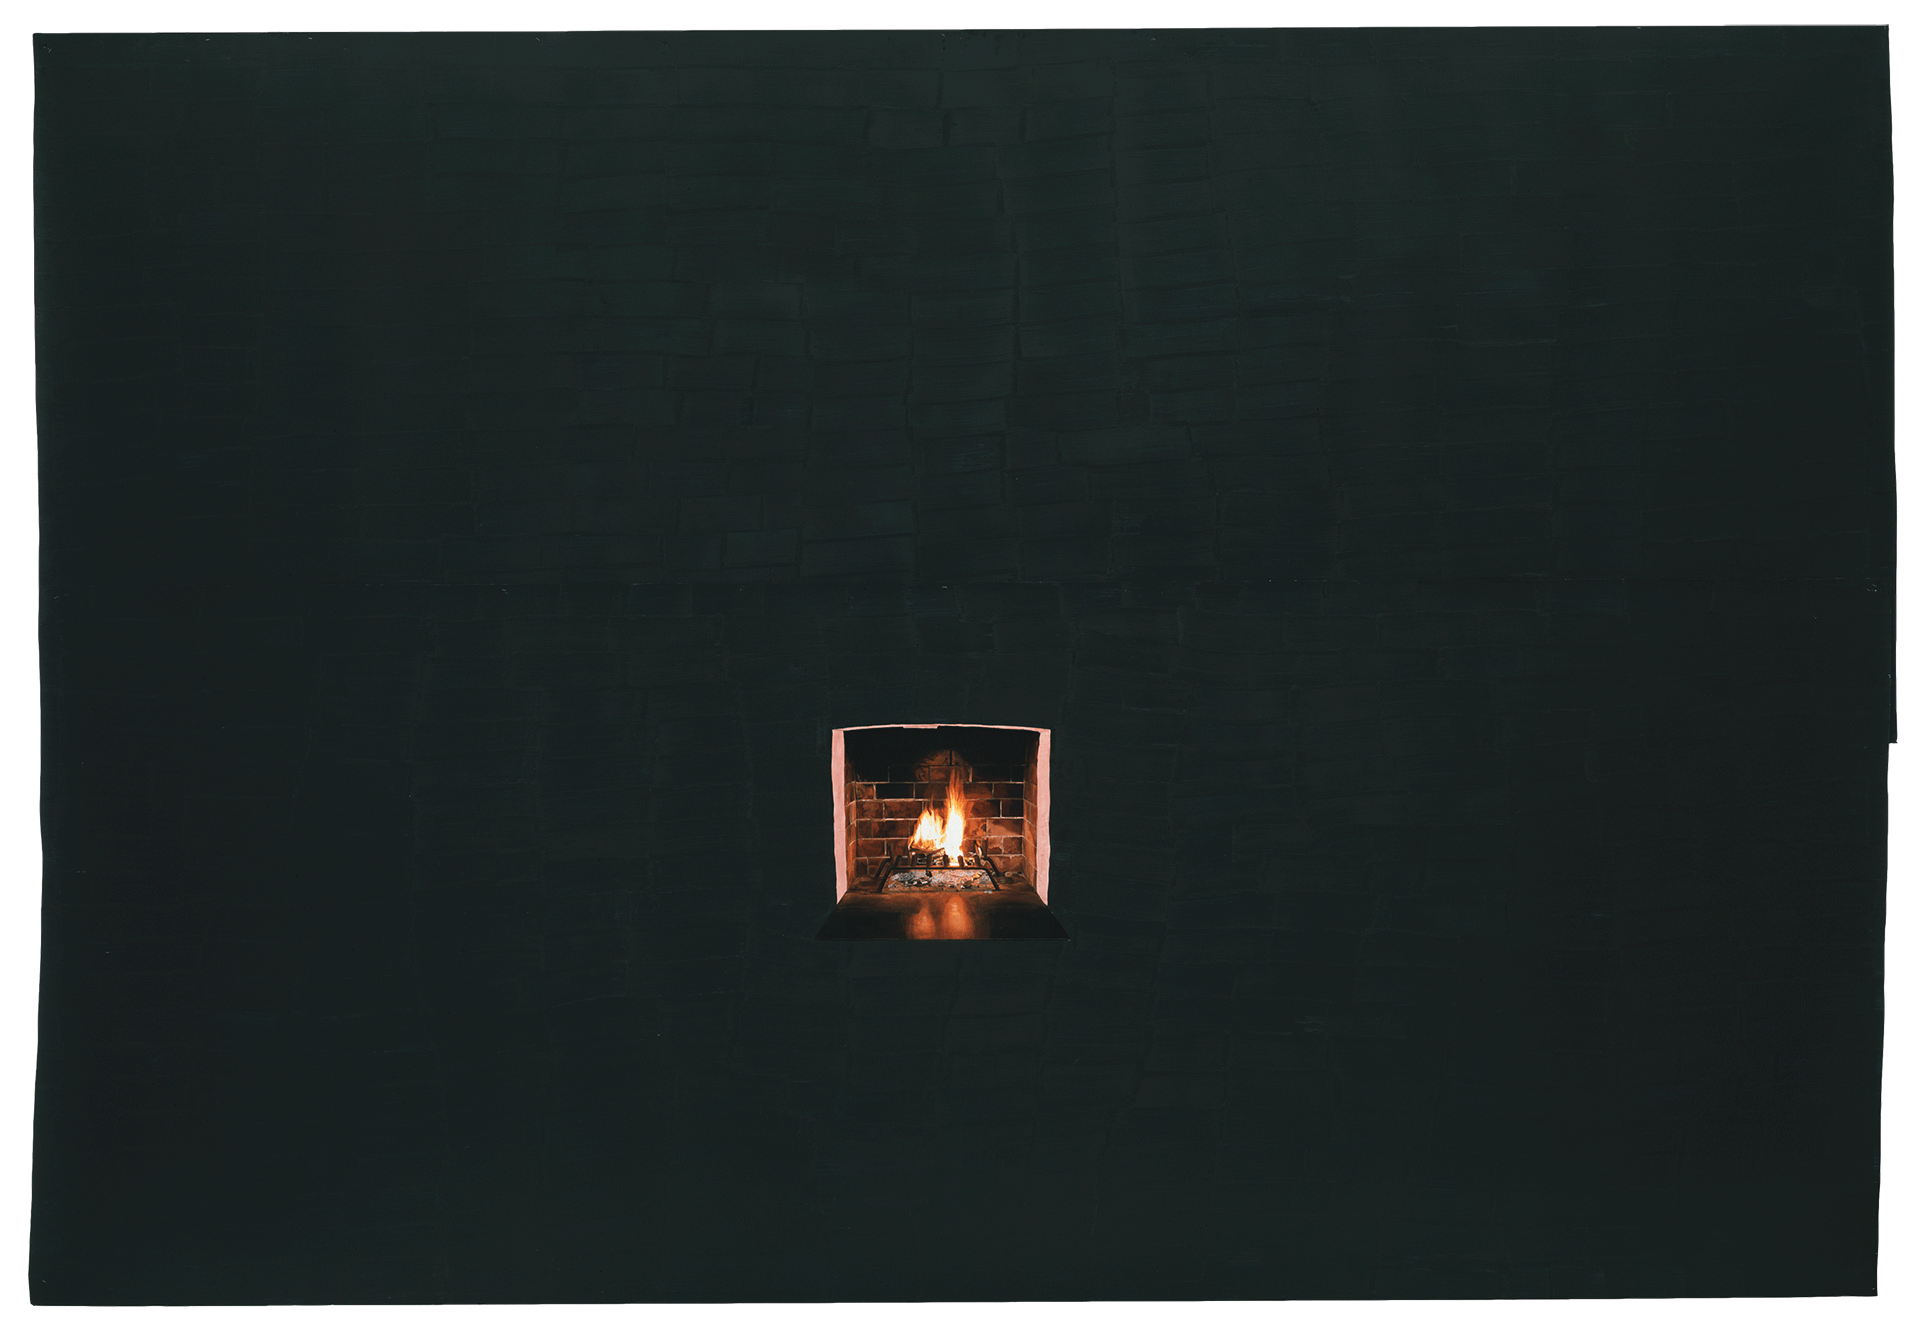 An encaustic wax and oil work on paper by Toba Khedoori, titled Untitled (black fireplace), dated 2006.